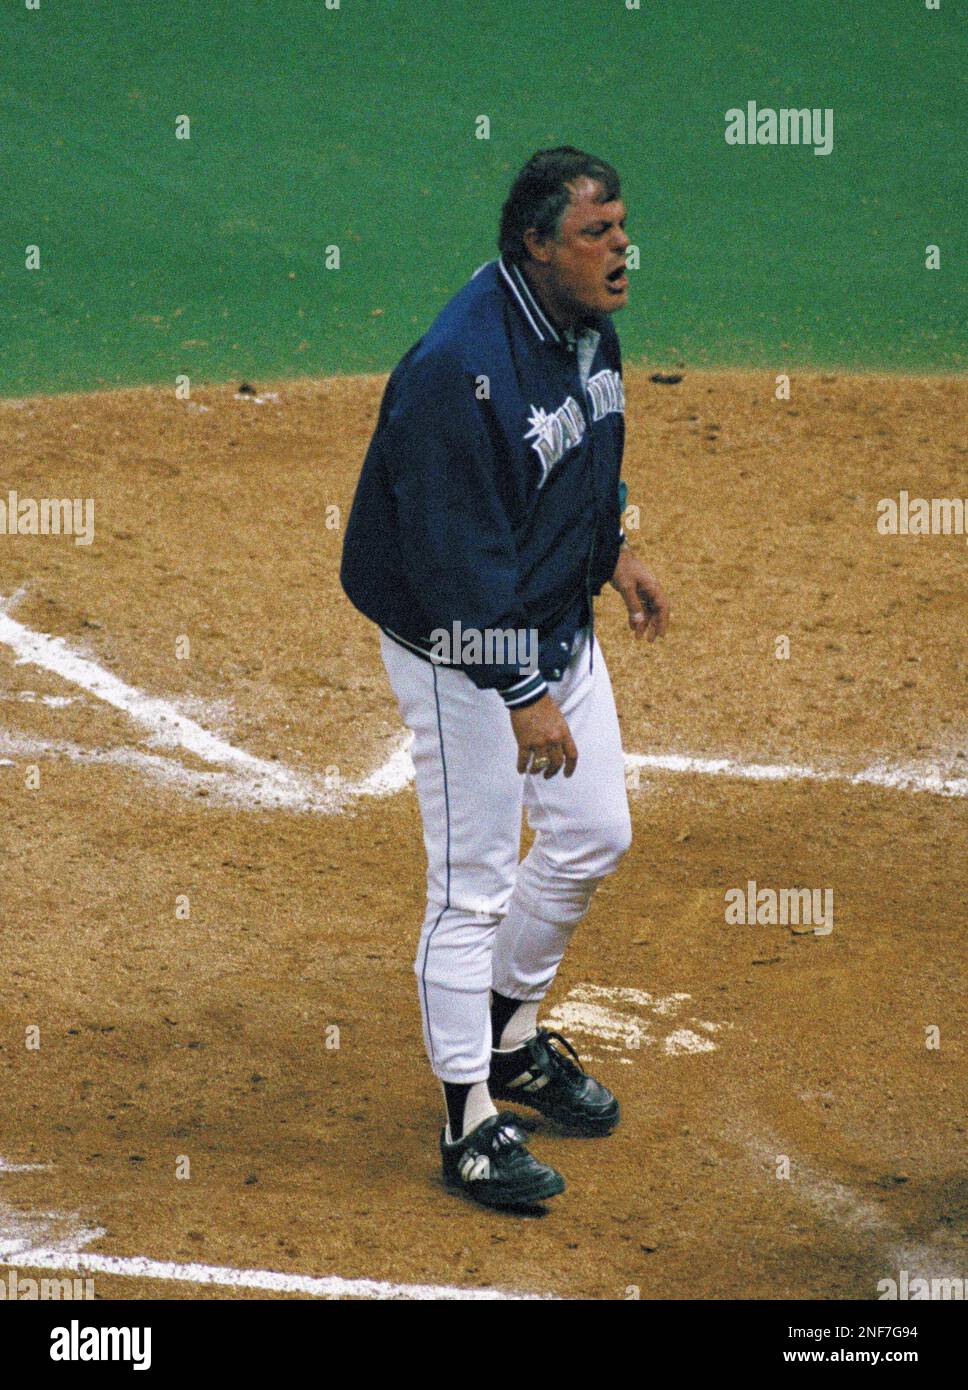 Mariners All-Time Managers  Seattle sports, Lou piniella, Seattle mariners